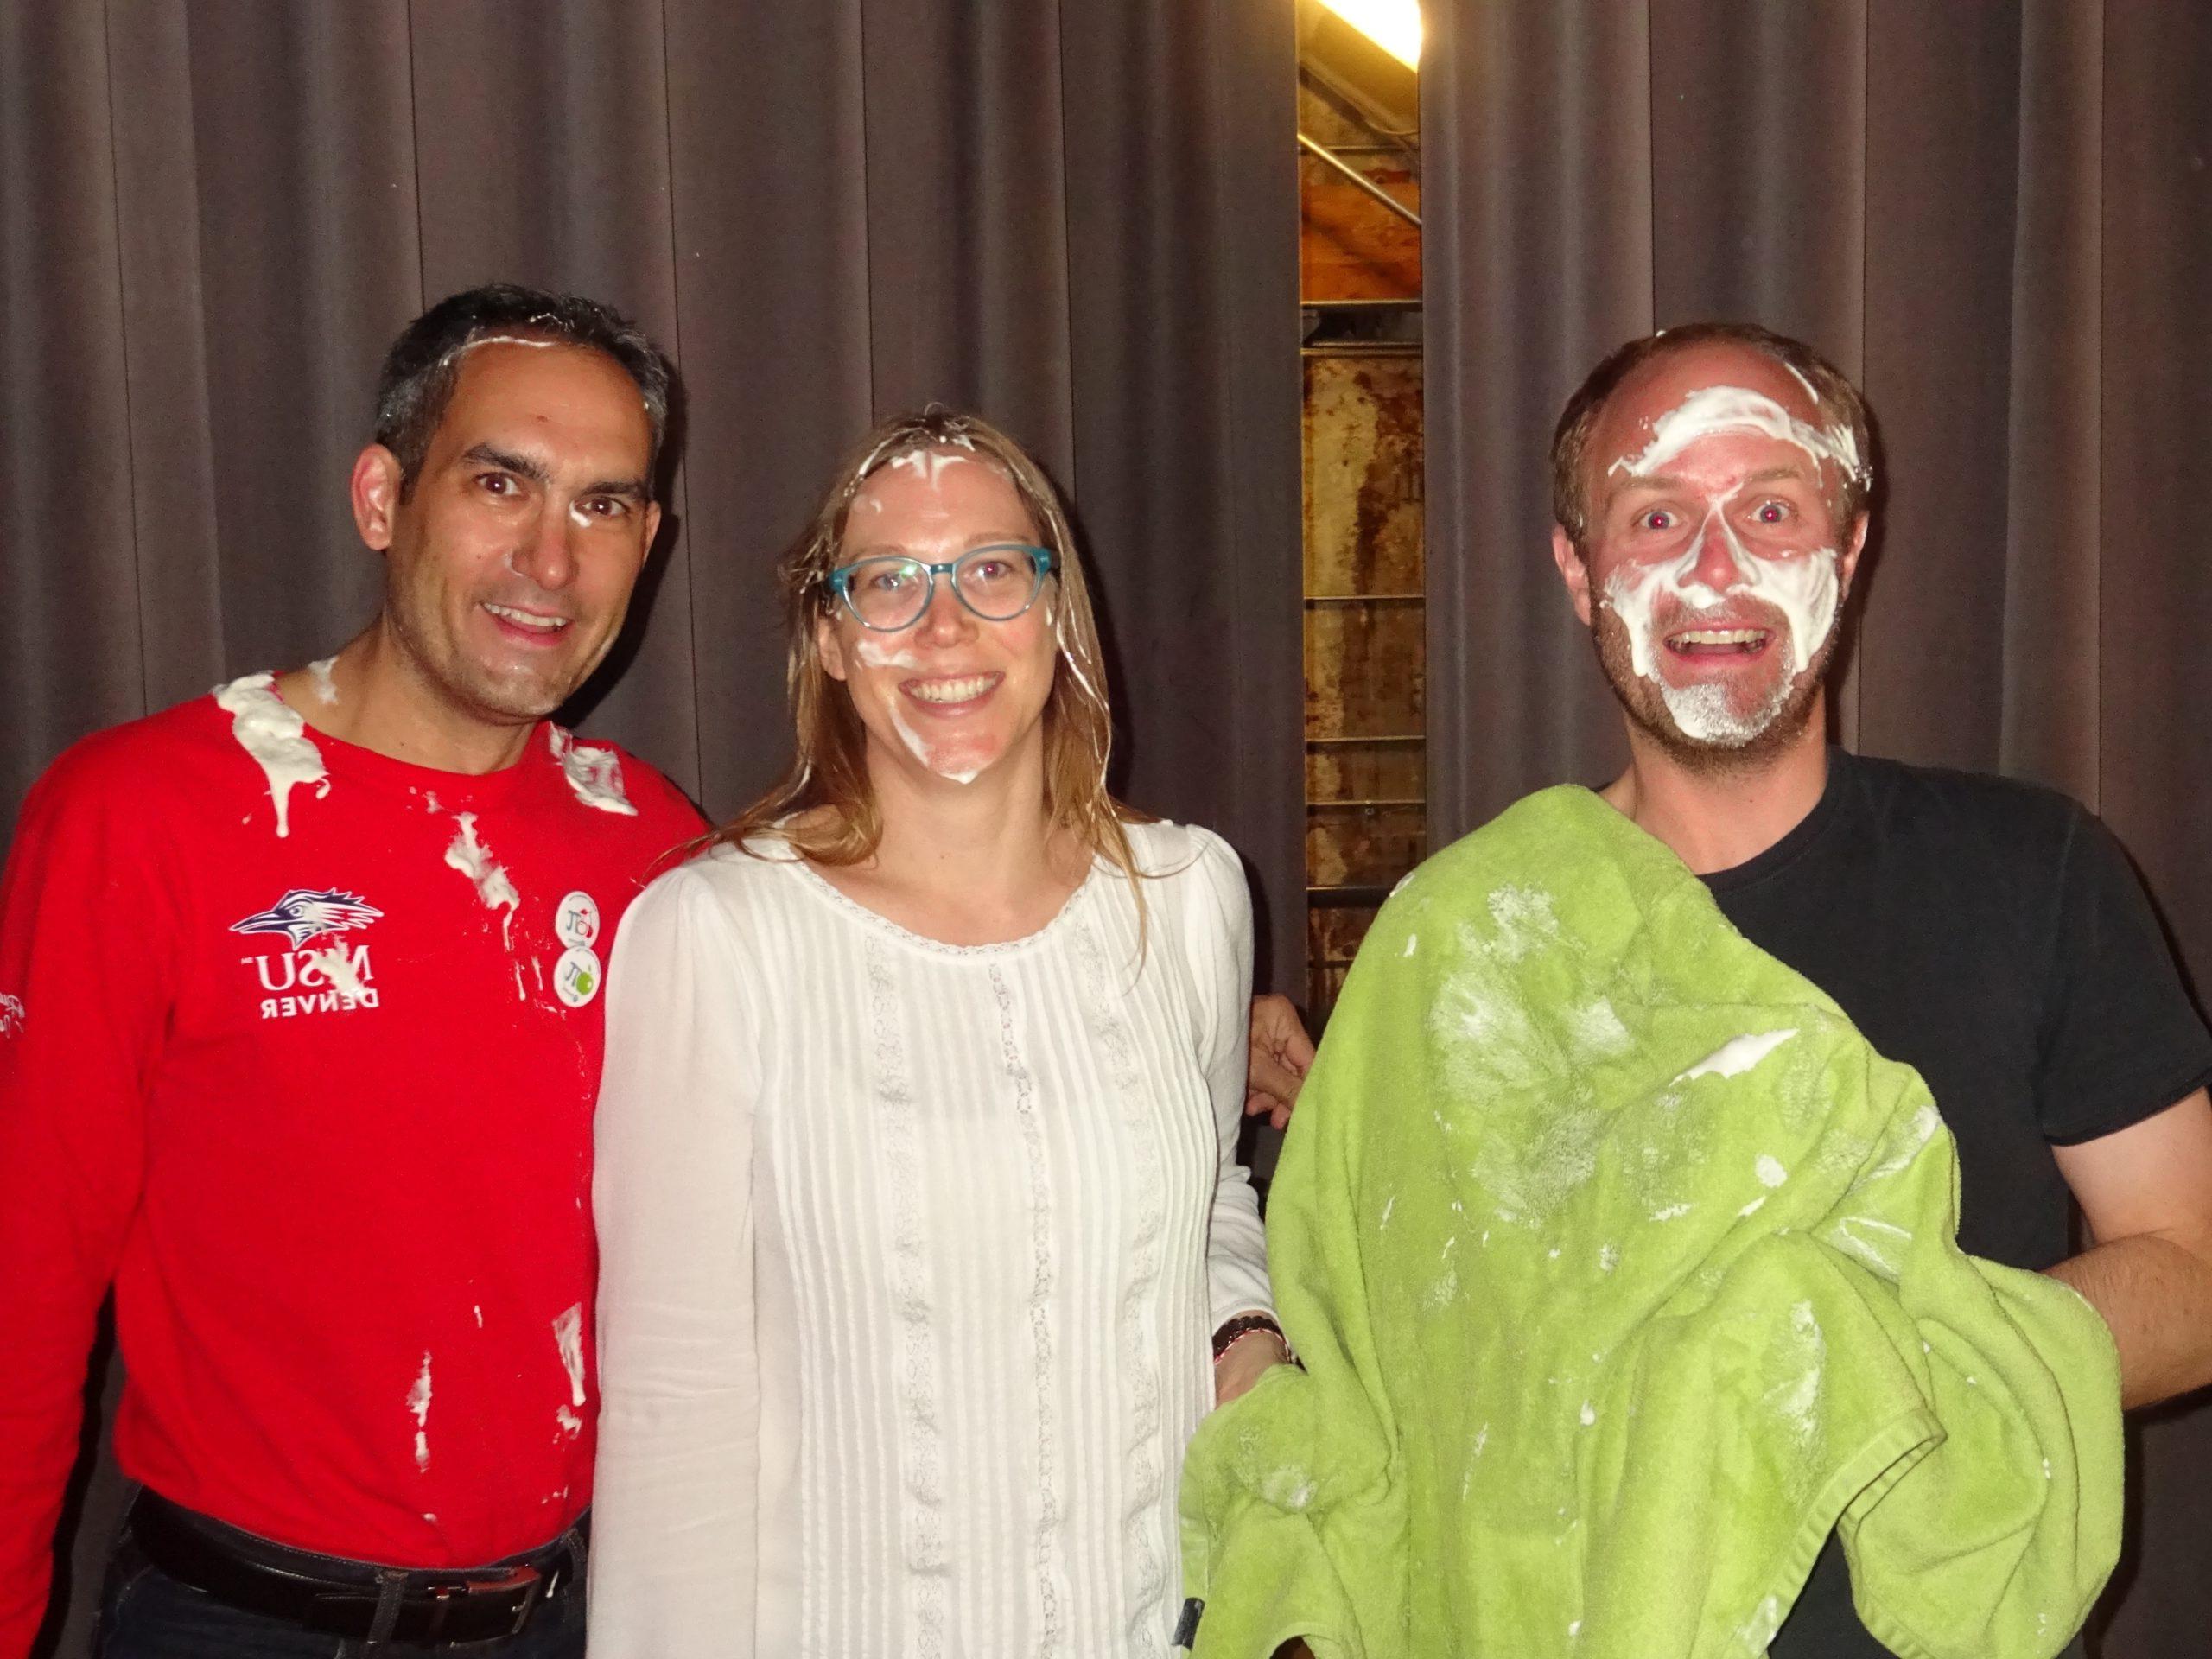 Teachers posing with whipped cream on their faces after being smushed with pies during 